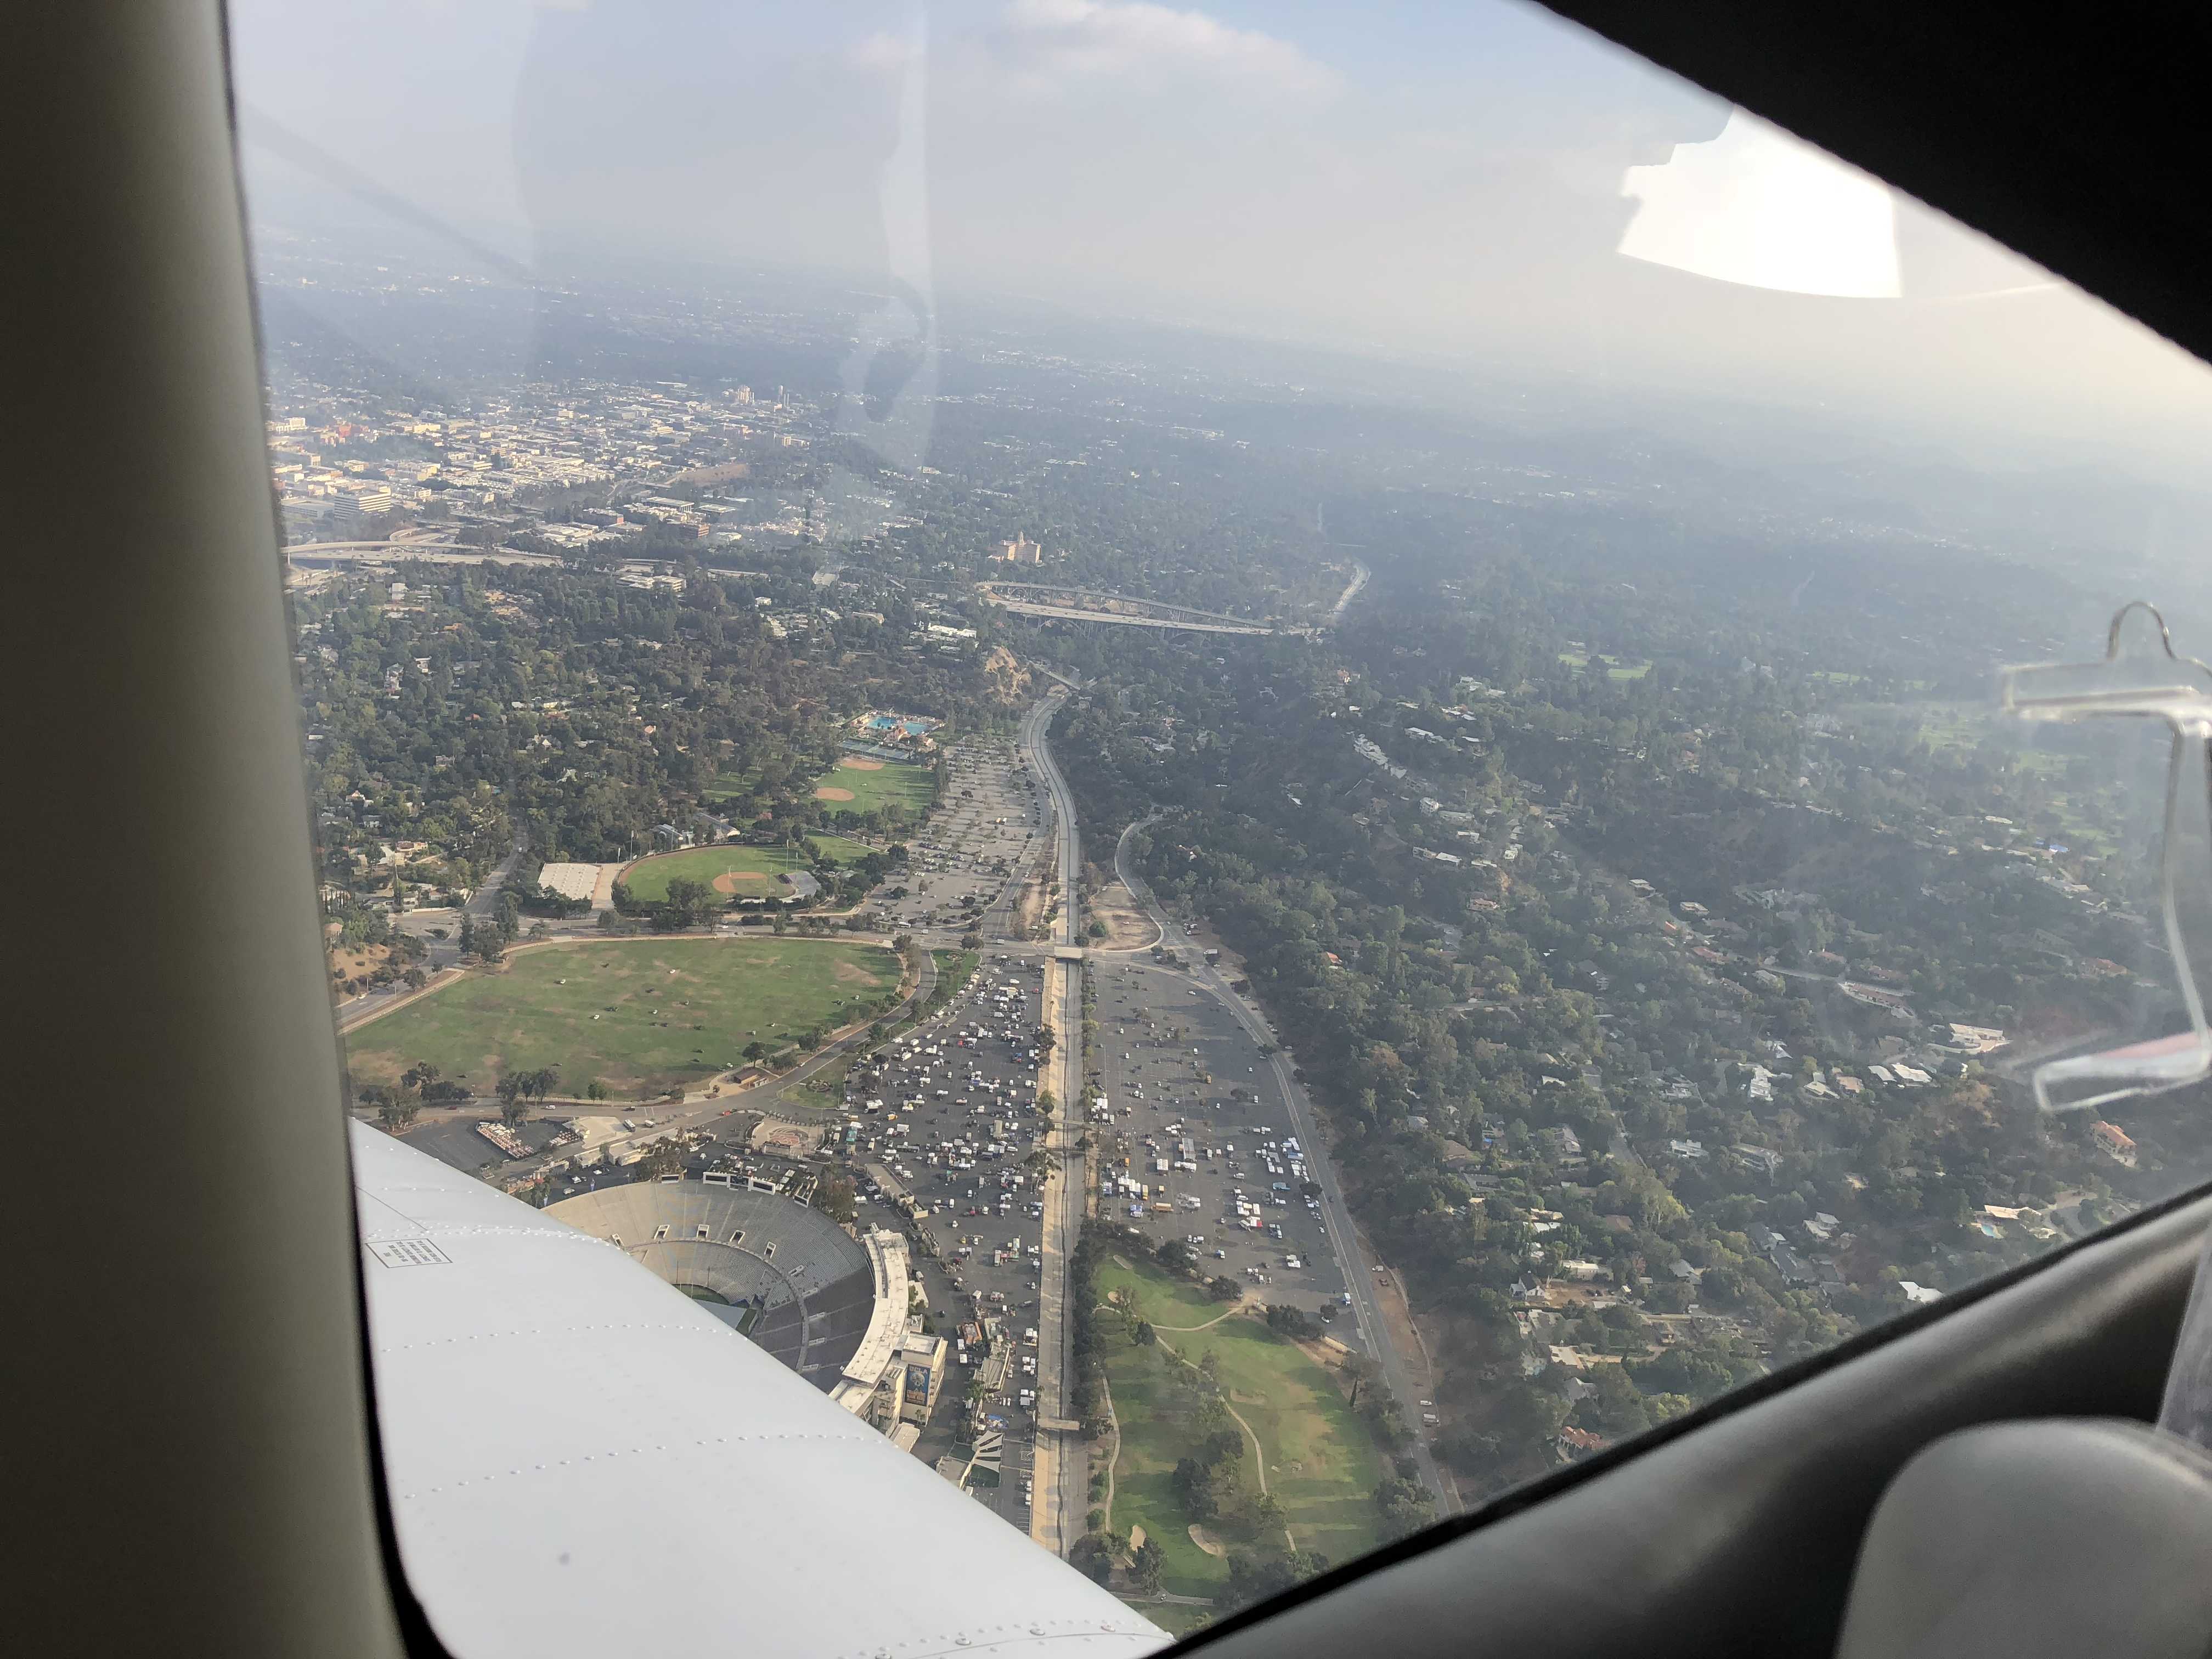 The view from a plane window over Pasadena